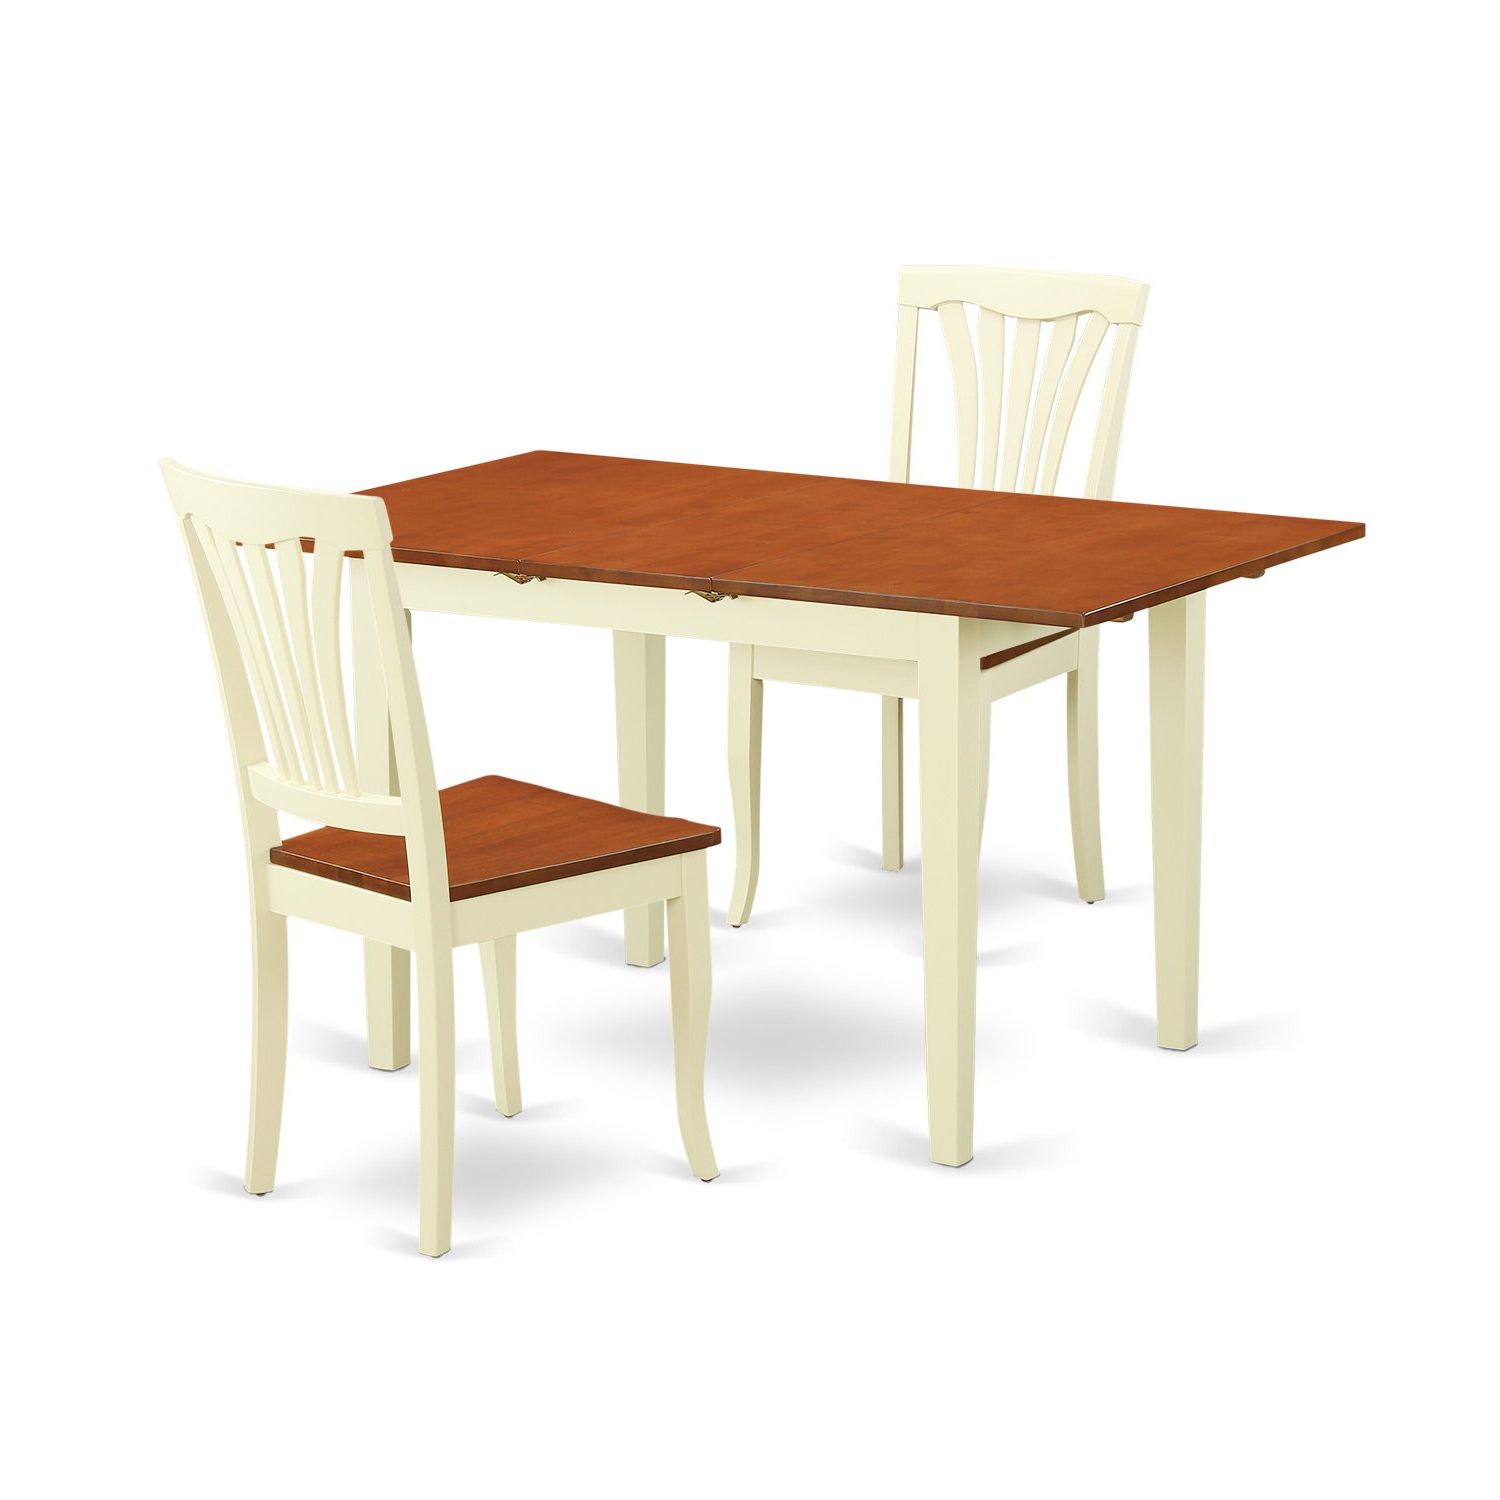 3 Pieces Dining Tables And Chair Set Intended For Fashionable East West Furniture Noav3 Whi W 3 Piece Dining Table And 2 Chairs Set (View 14 of 25)